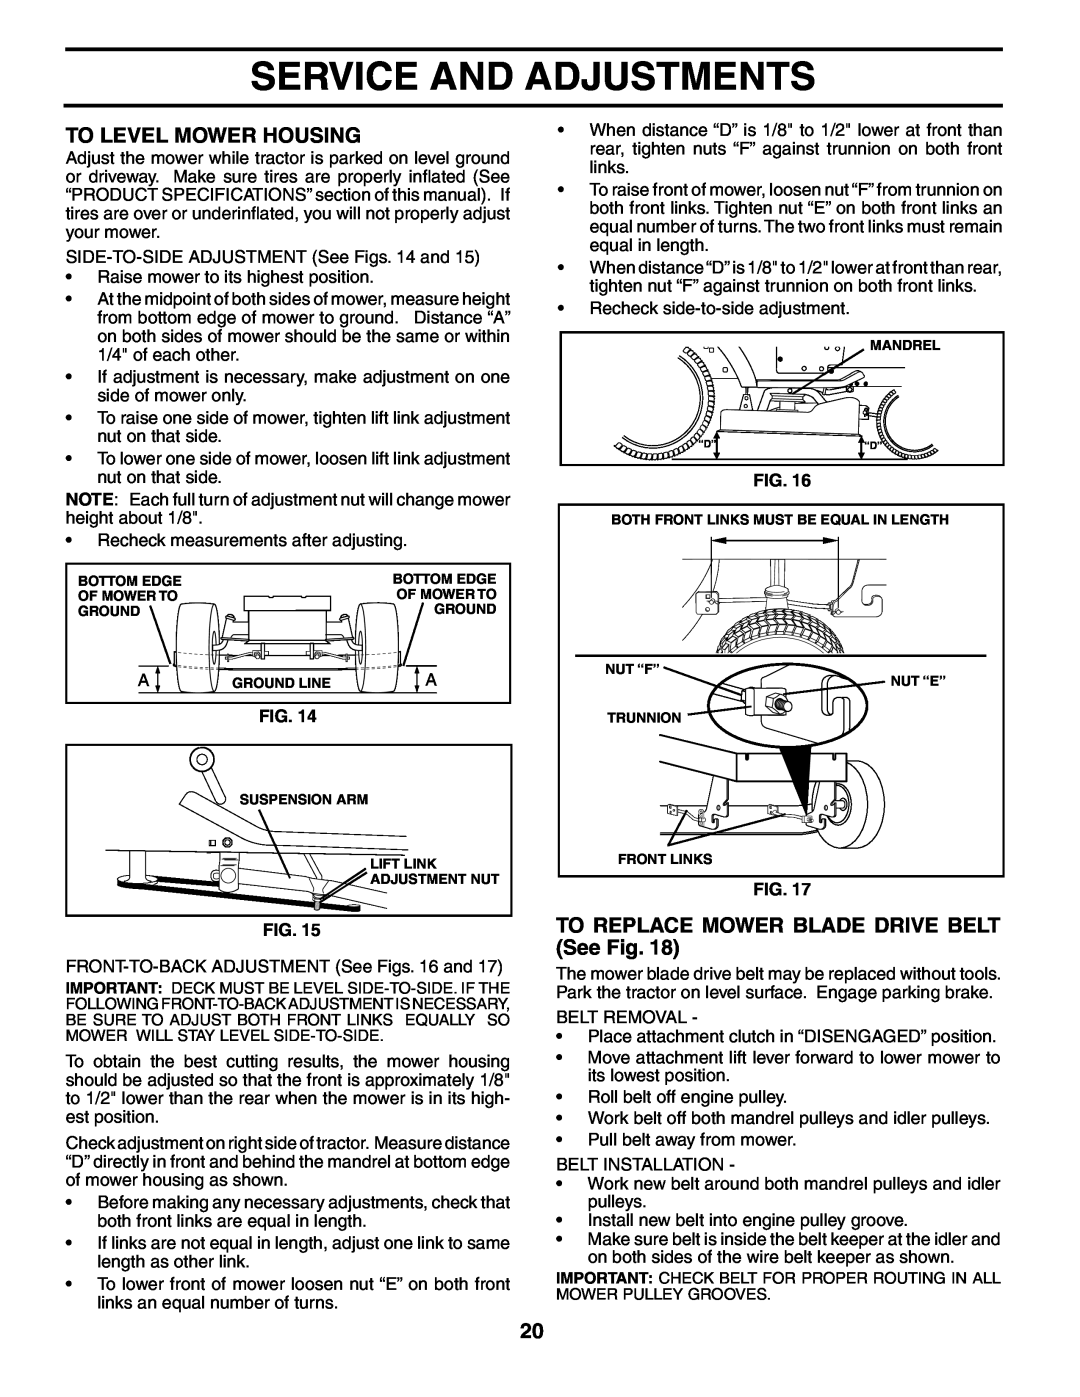 Murray MB12538LT manual To Level Mower Housing, TO REPLACE MOWER BLADE DRIVE BELT See Fig, Service And Adjustments 